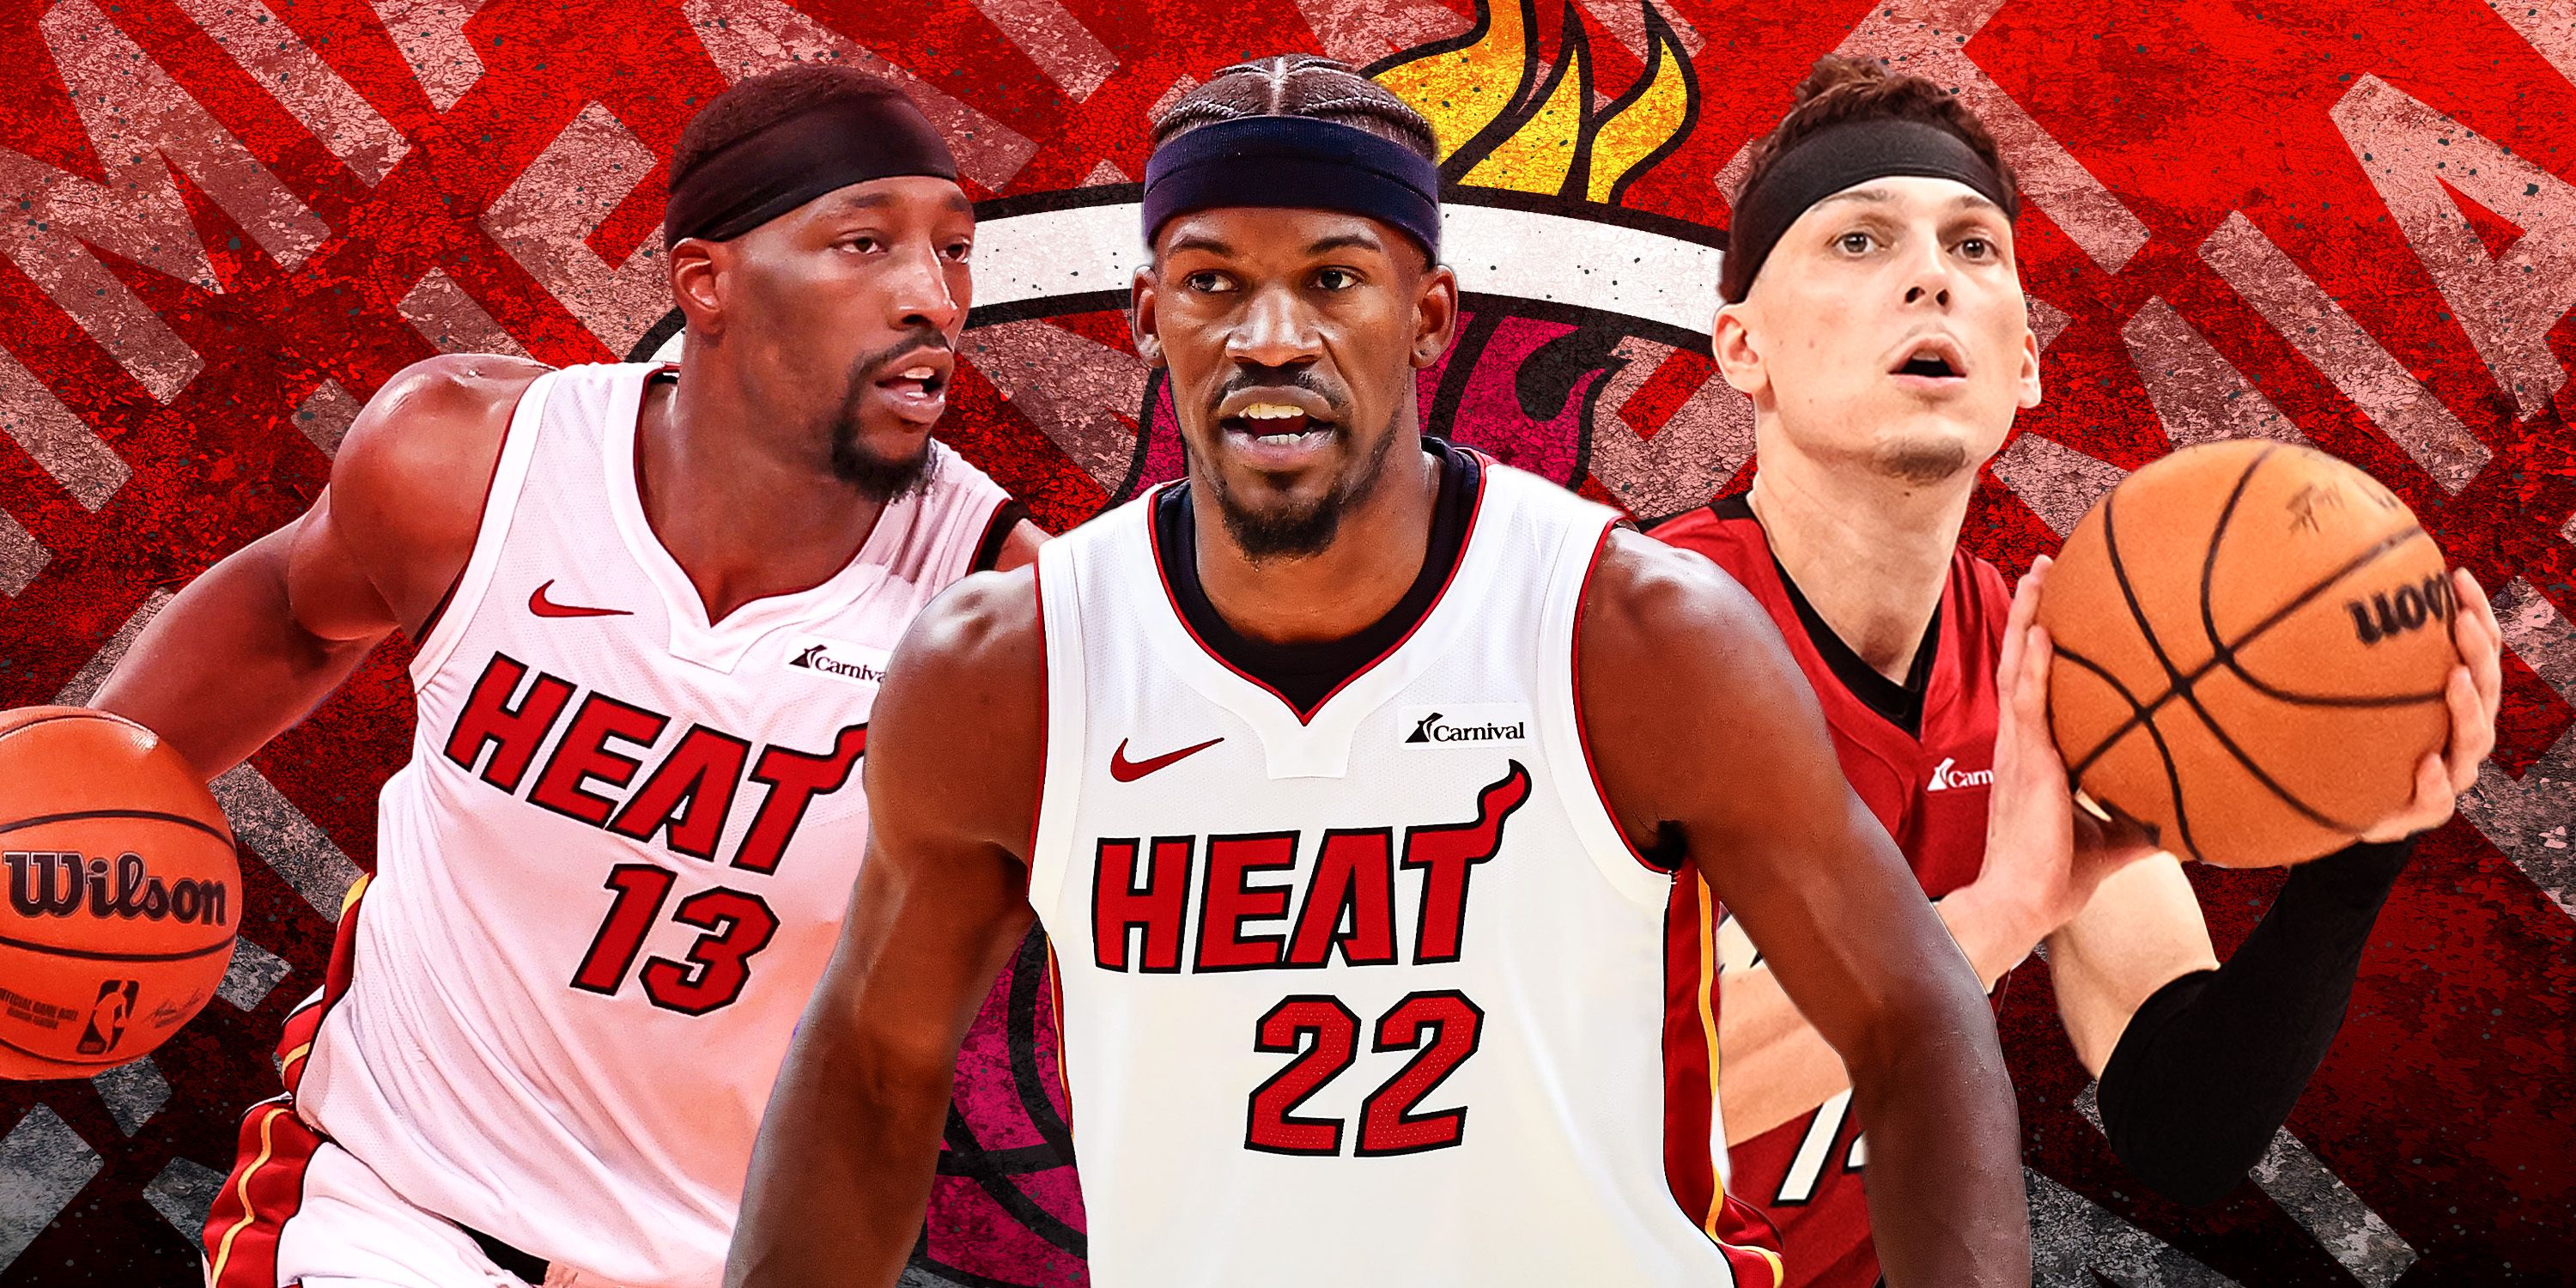 It's not just culture: Heat are poised for a second-half turnaround